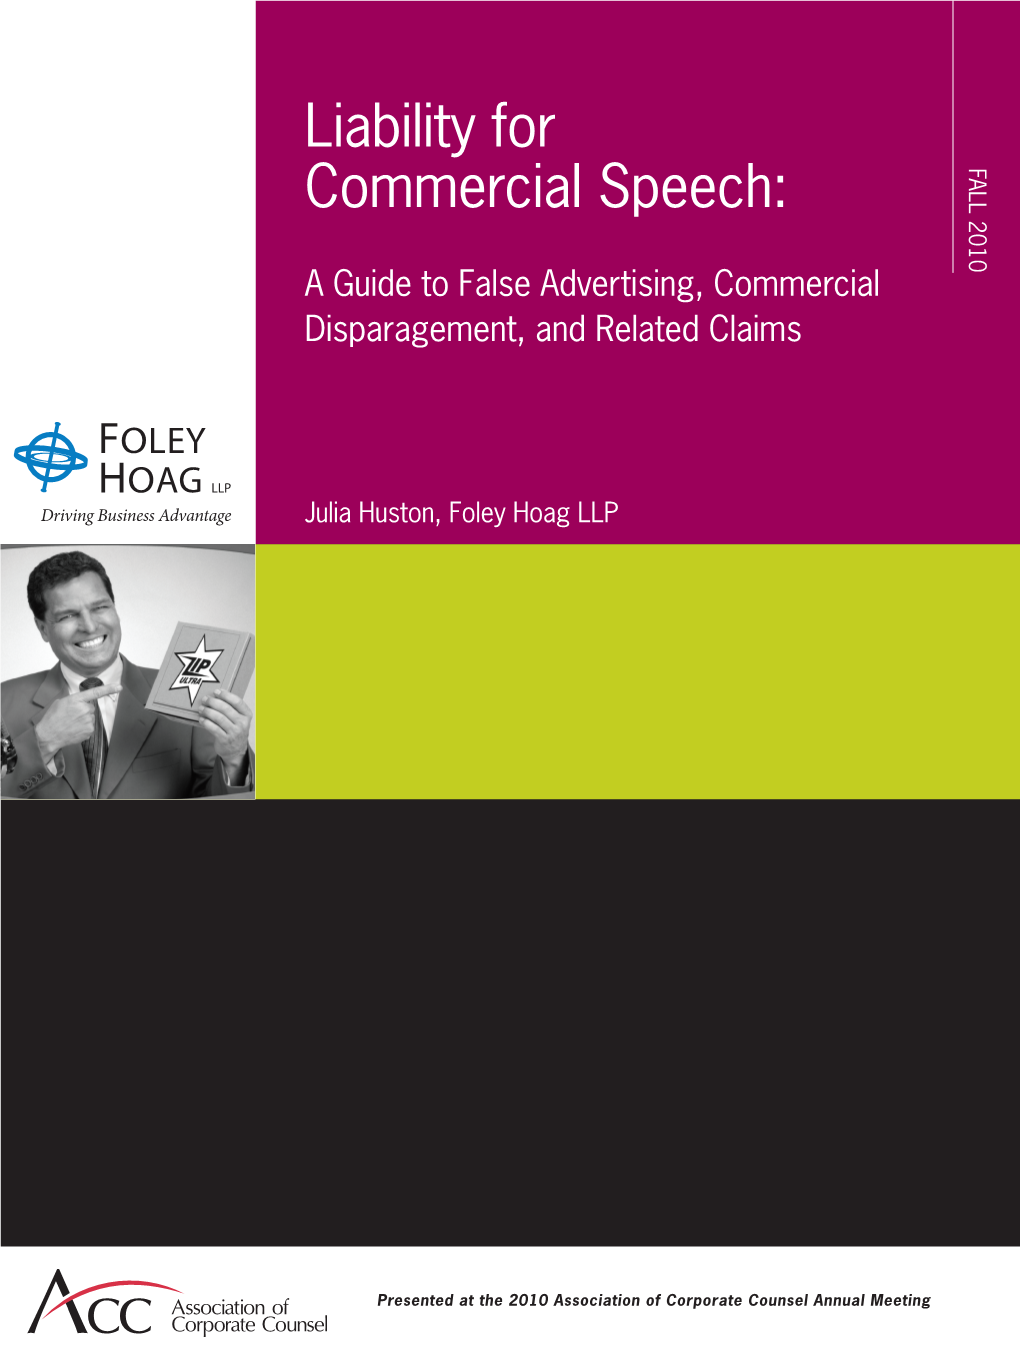 Liability for Commercial Speech